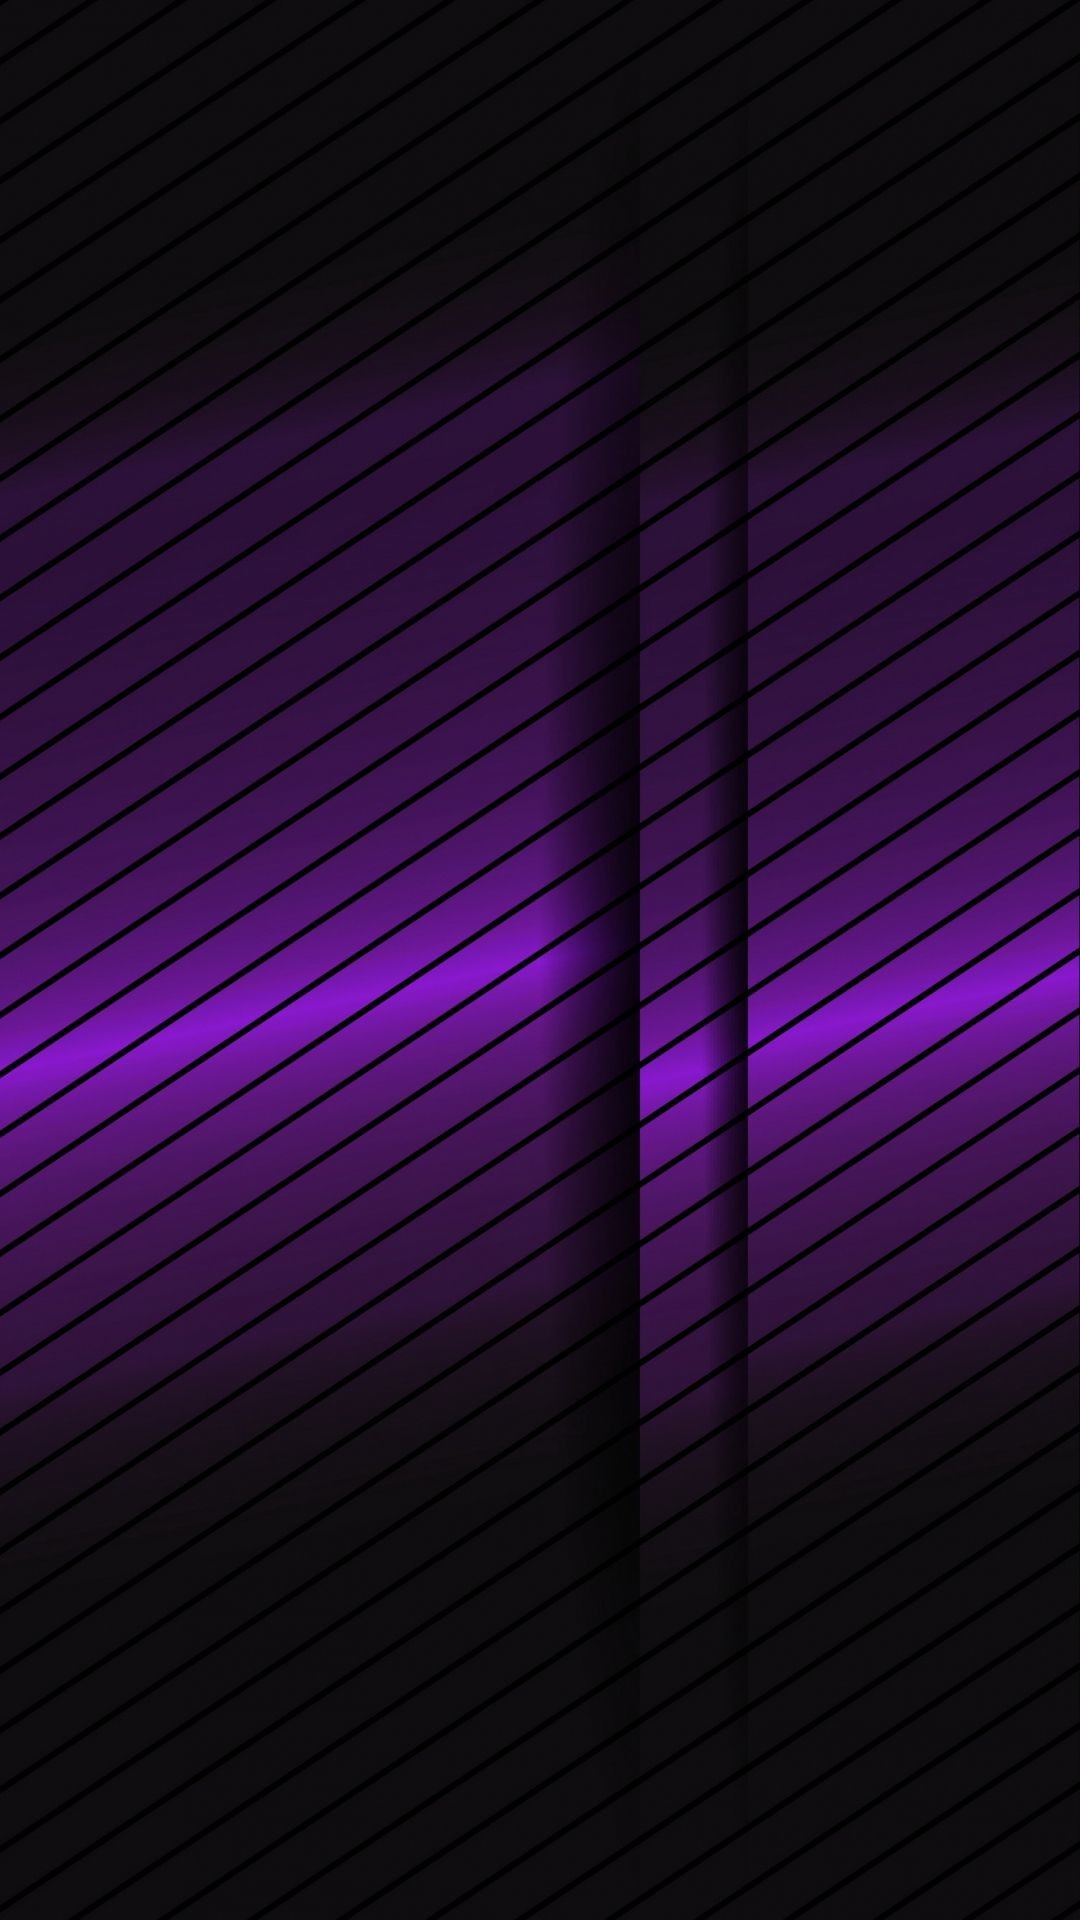 1080x1920 Abstraction Line Purple iPhone 6 wallpaper Black And Purple Wallpaper,  Black Wallpaper Iphone, Colorful